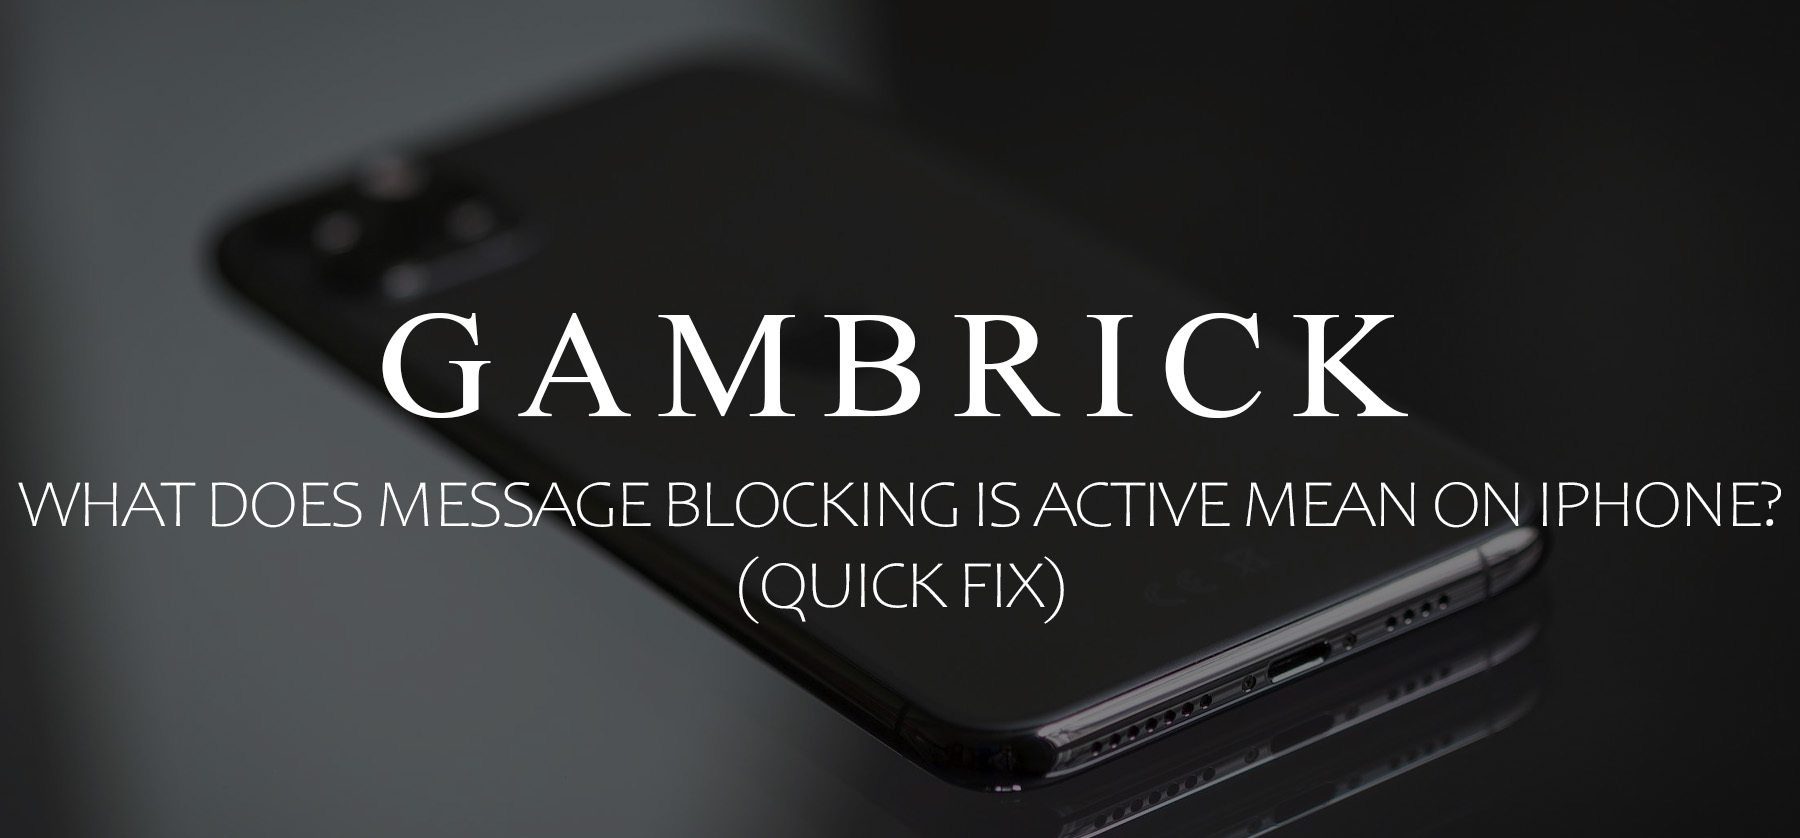 How To Fix Message Blocking Is Active: Easy Solutions